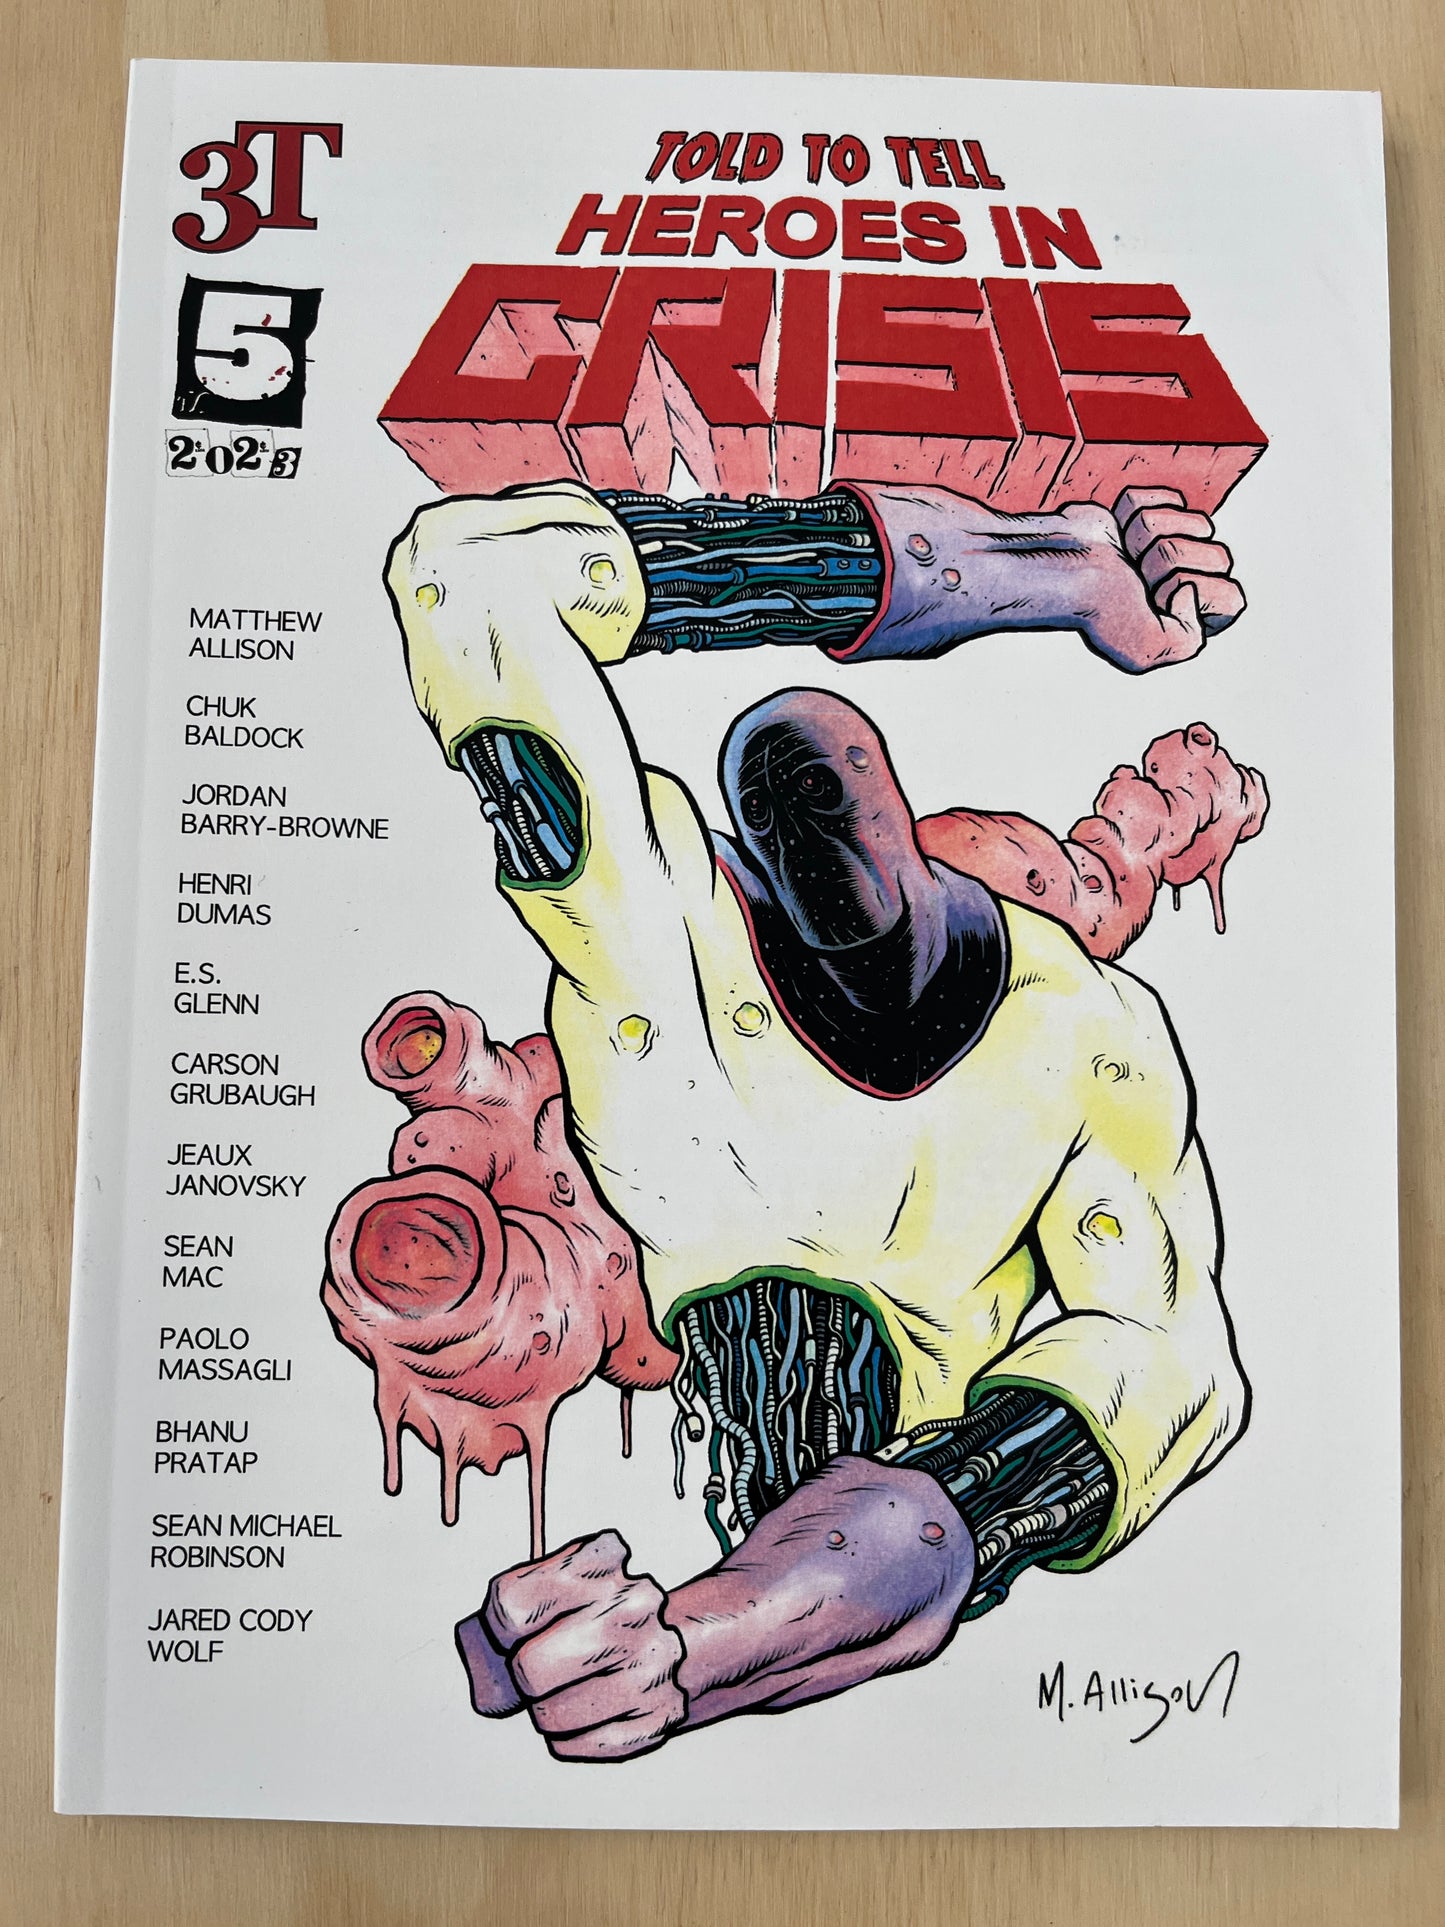 Told to Tell 5: Heroes in Crisis